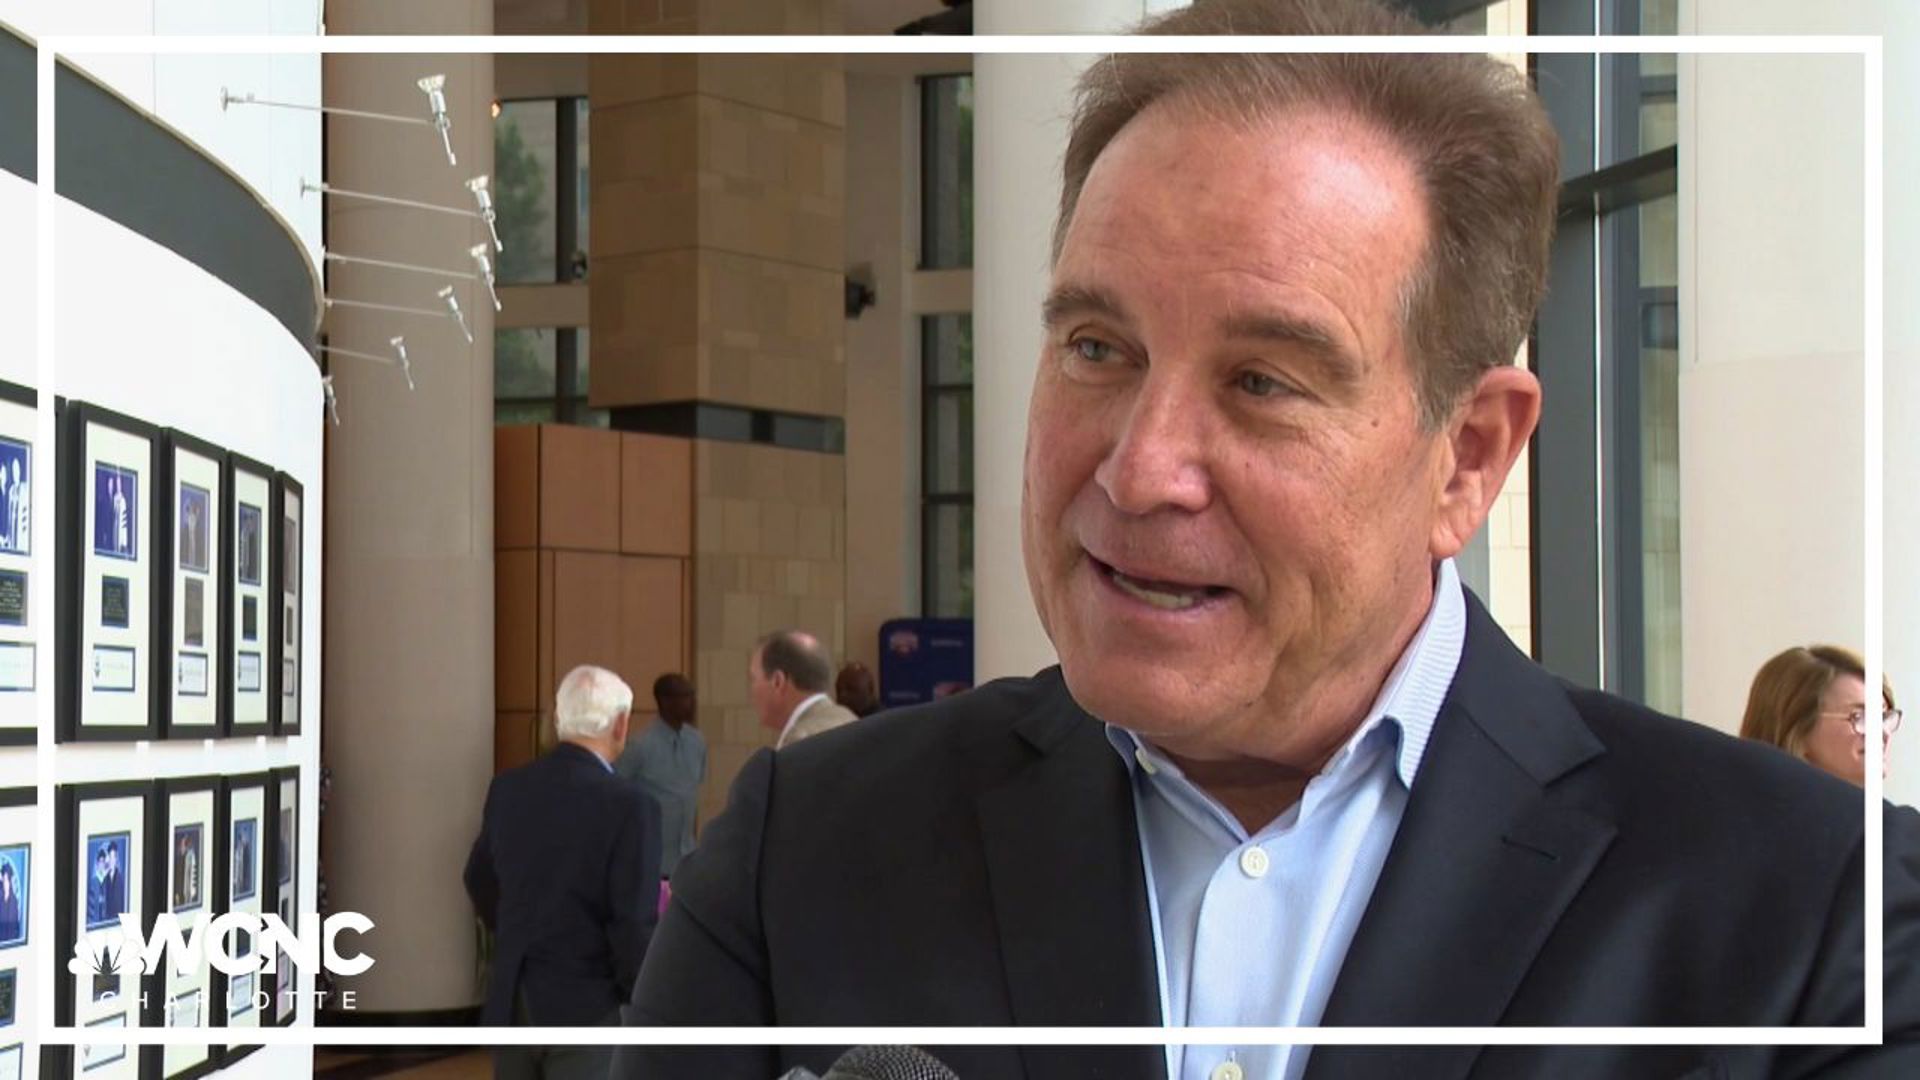 Broadcasting legend Jim Nantz reflects on his career and the honor of getting inducted into the North Carolina Sports Hall of Fame.